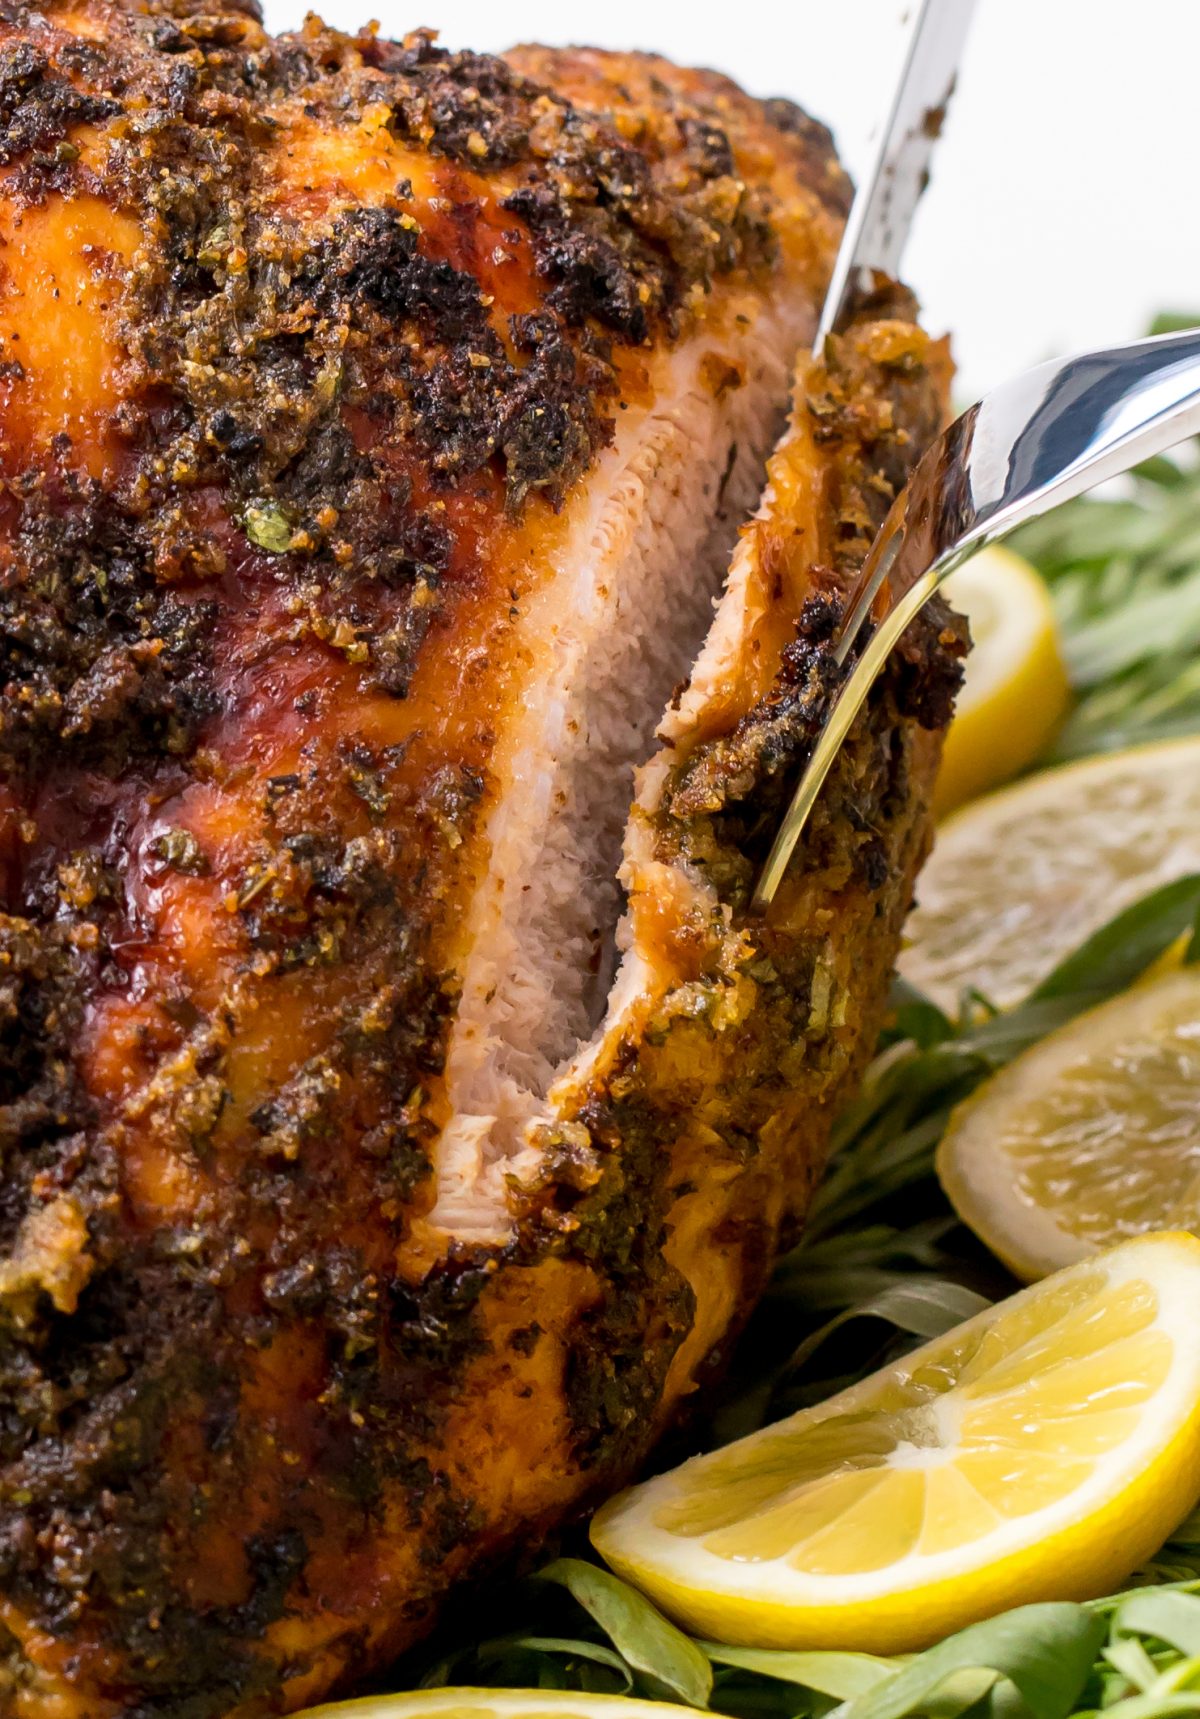 Tender and juicy grilled turkey breast- cutting a plated grilled turkey with sauce on on a bed of grass and lemons on a white table using a knife and fork